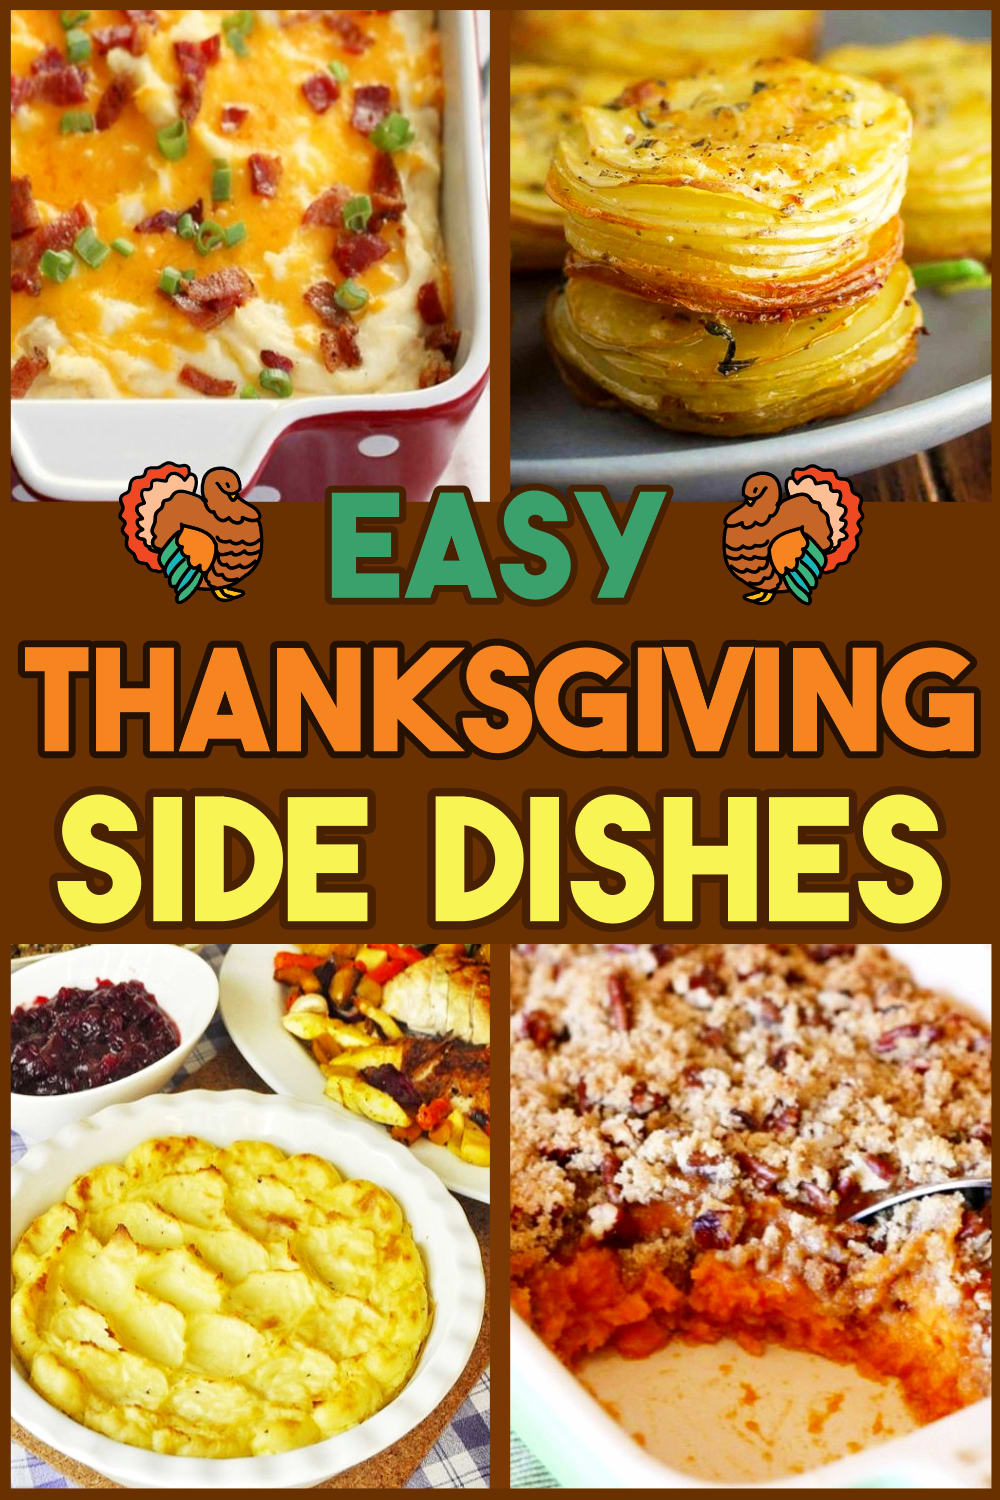 Easy Thanksgiving Side Dishes-Make ahead BEST Thanksgiving Side Dishes & side dishes for turkey - Make ahead side dishes for a crowd or Holiday dinner - Thanksgiving Vegetable Side Dishes Make Ahead Easy Thanksgiving Sides - Paula Deen Cheesy Squash Casserole & Duchess Potatoes Pioneer Woman.Not so traditional Make ahead Thanksgiving recipes including Parmesan and Rosemary Potato Stacks & Sweet Potato Souffle - Top 10 Thanksgiving Sides & more easy side dishes recipes for Thanksgiving meal, Christmas or potluck-Thanksgiving dishes to bring or made the day before